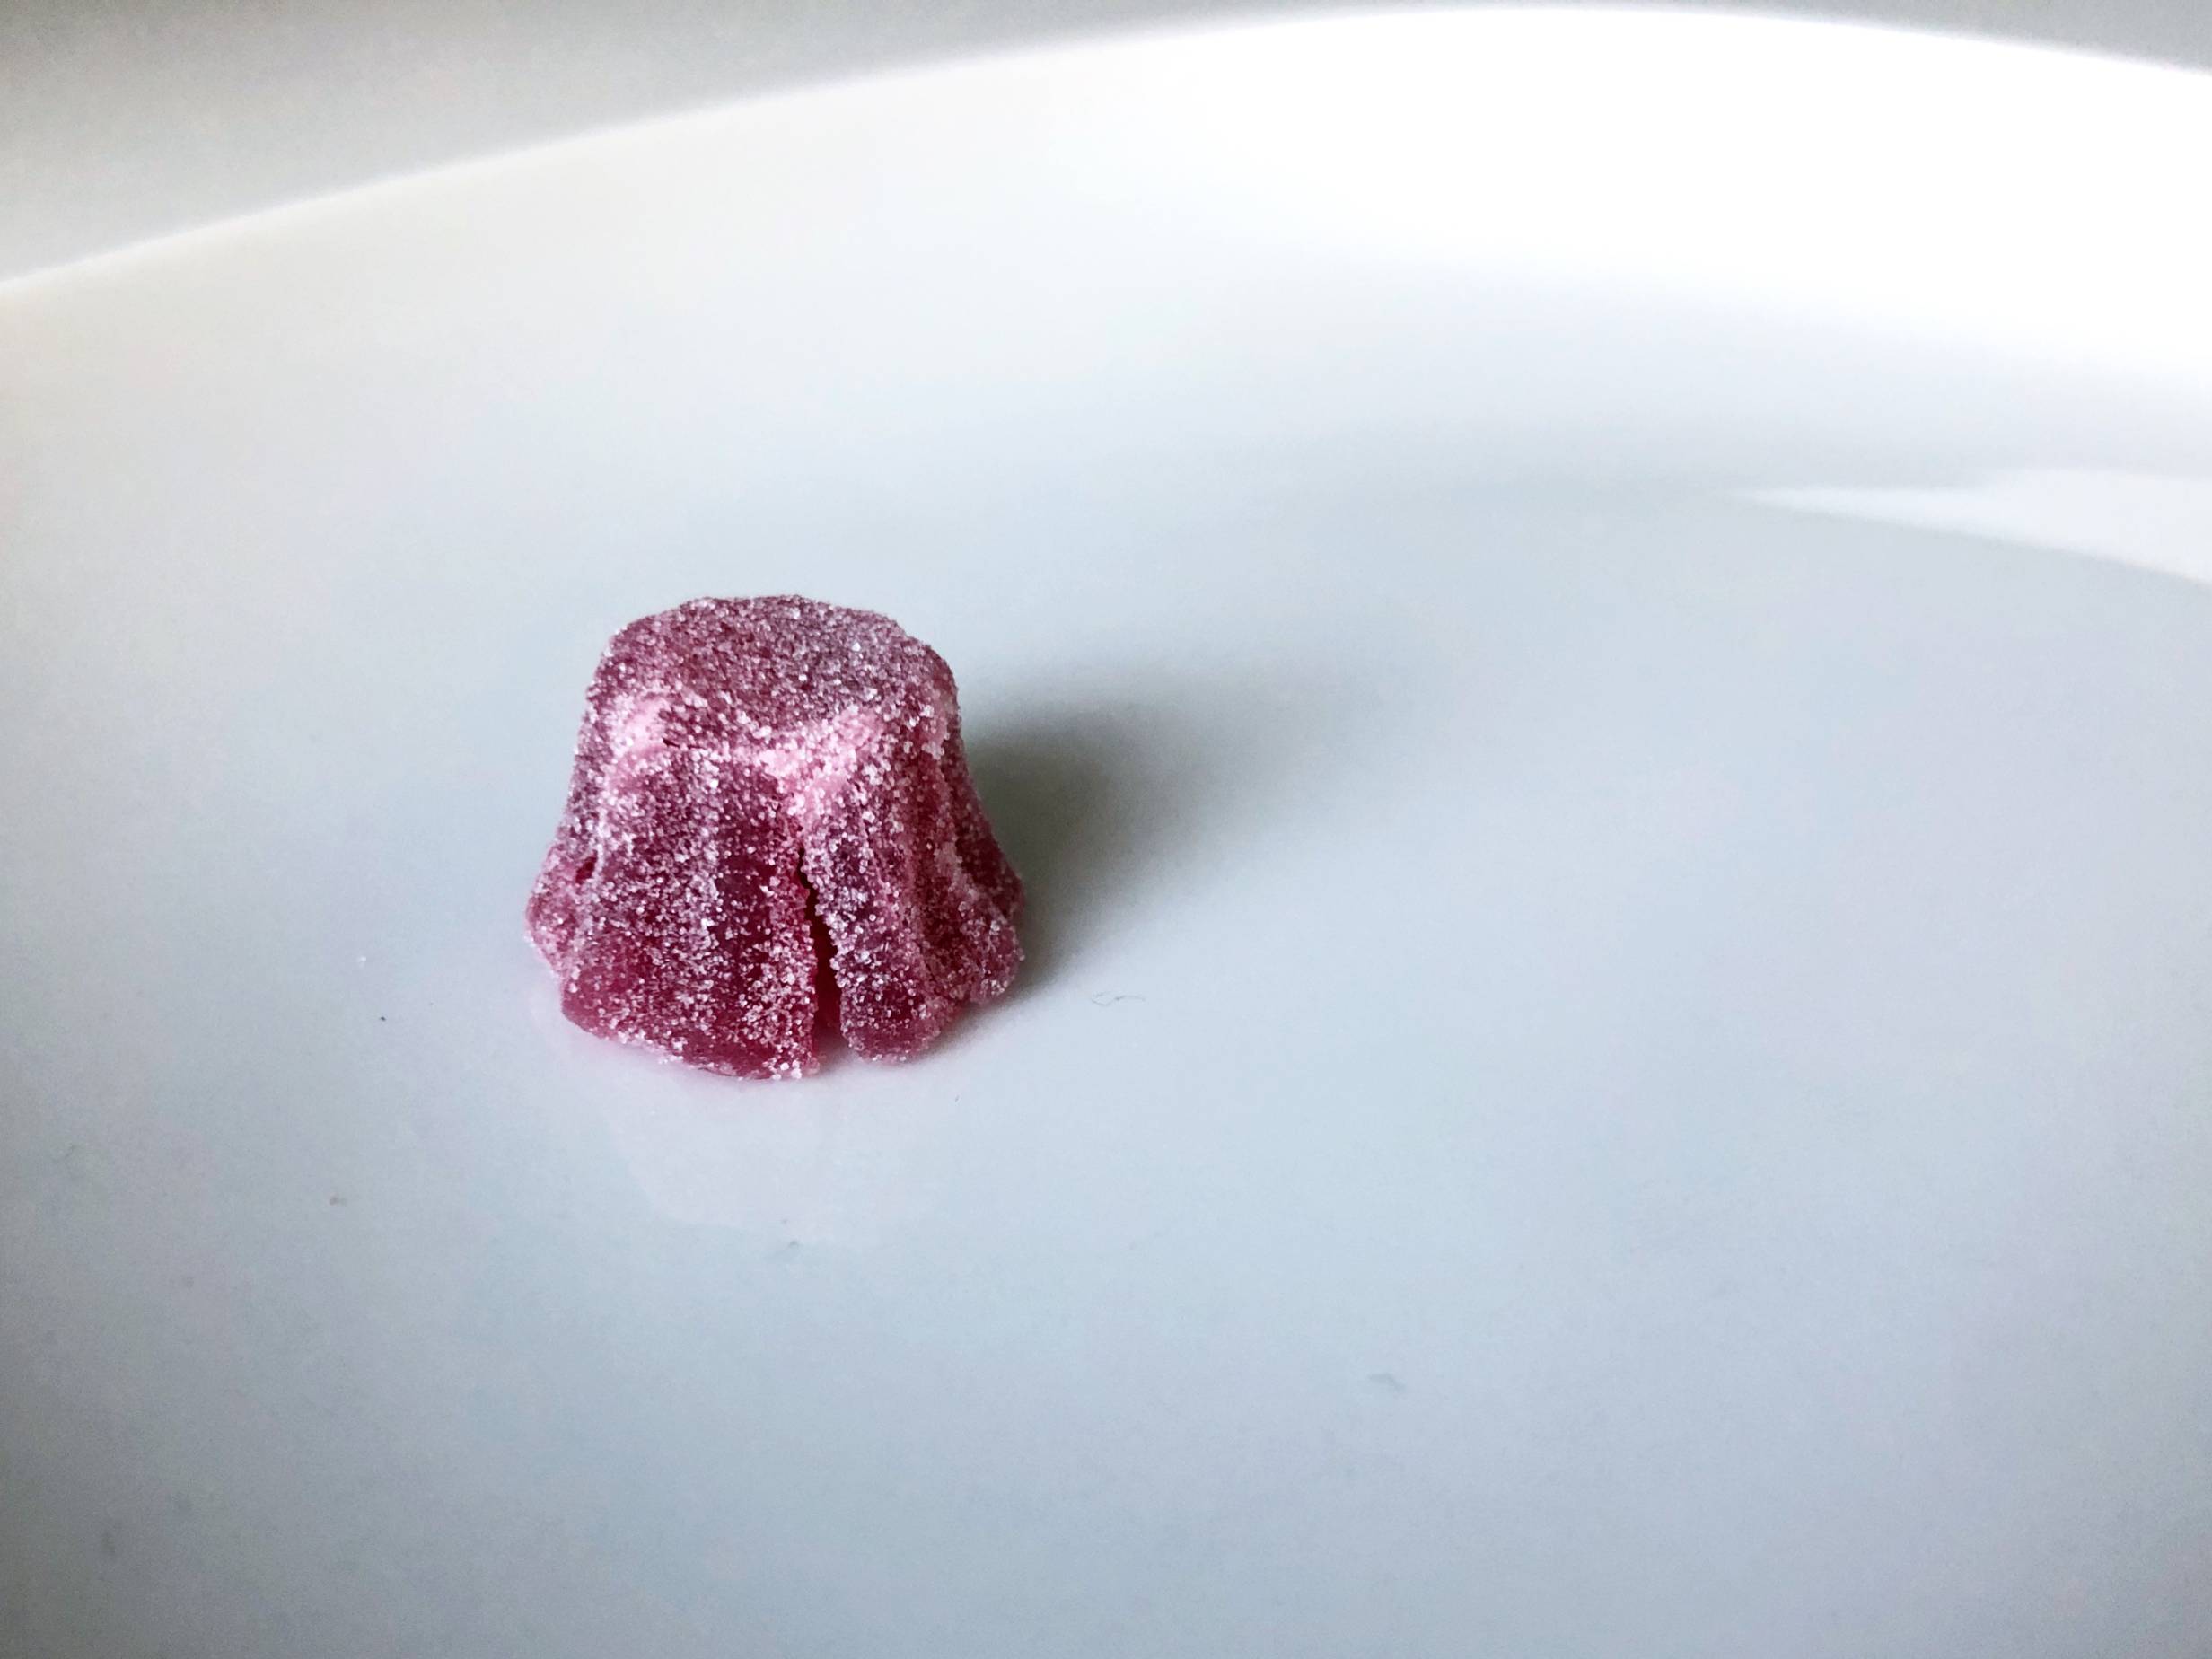 A purple, cannabis-infused gummy is covered in white, granulated sugar and sits on a white plate. Photo by Alyssa Buckley.